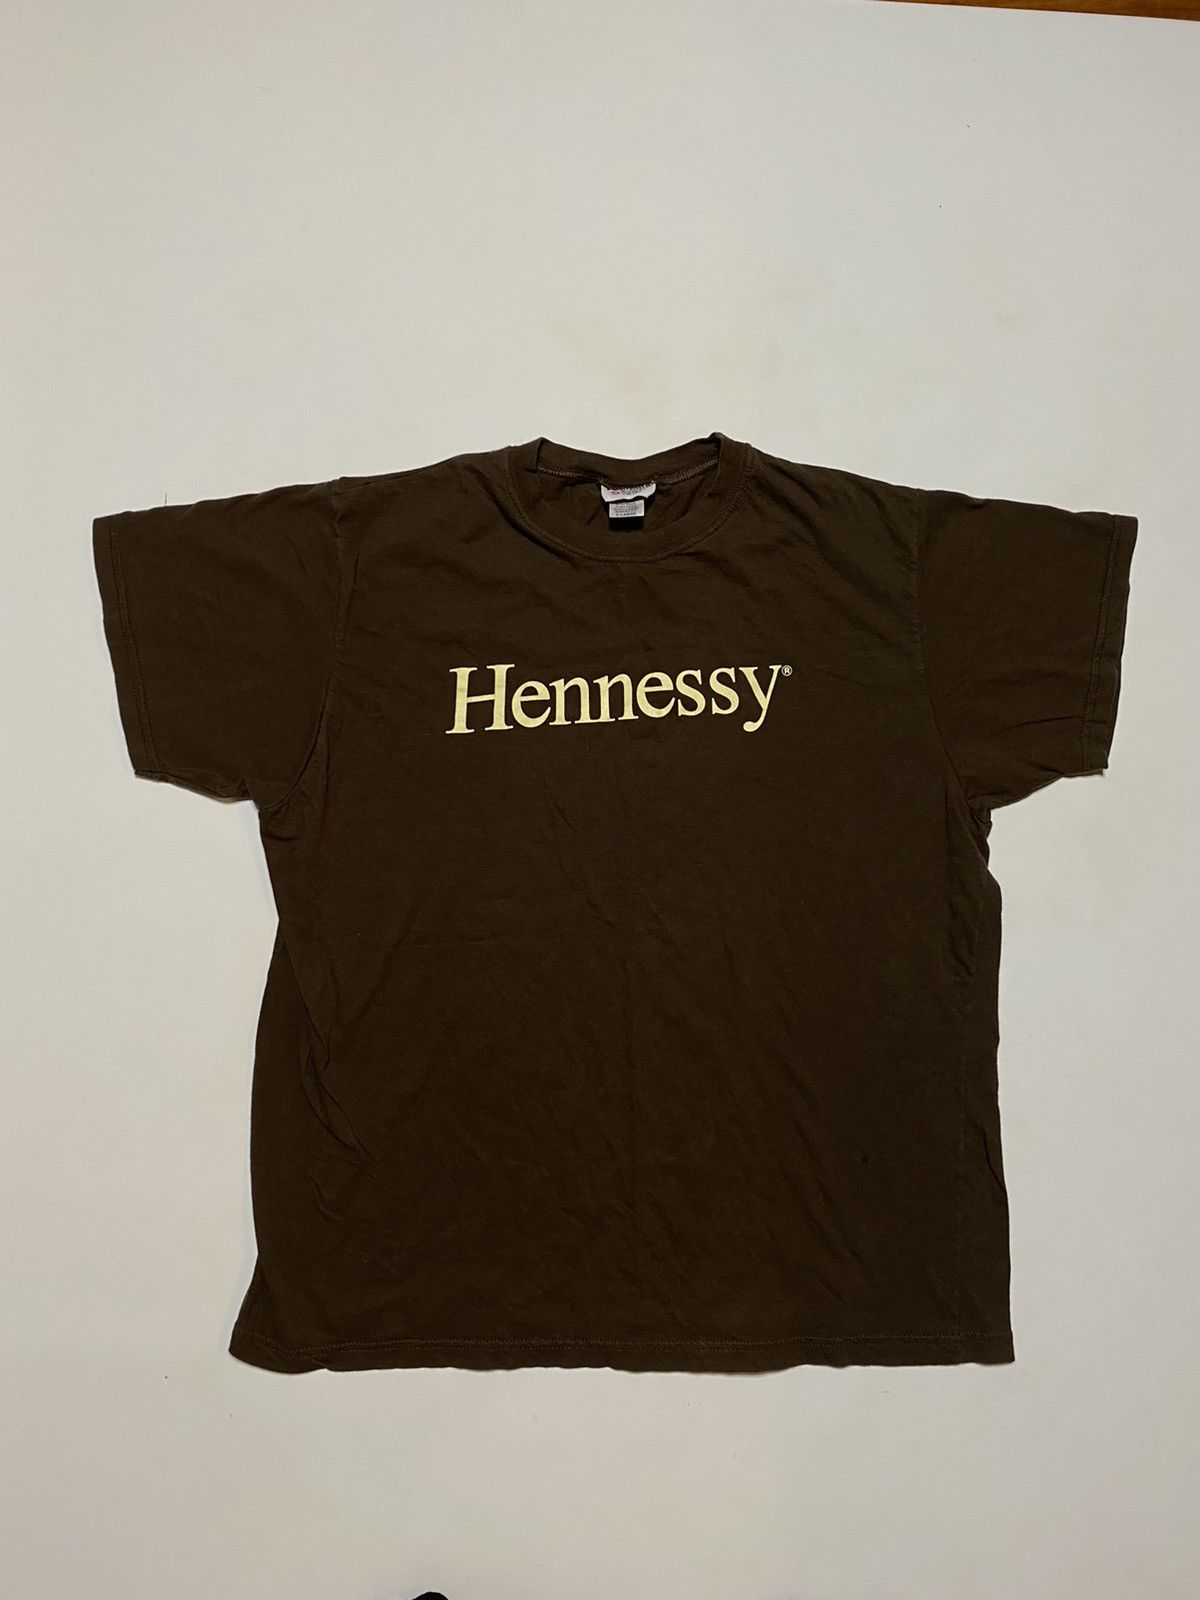 Hennessy Vintage Hennessy Cognac T Shirt Size XL Made IN USA Size US XL / EU 56 / 4 - 3 Thumbnail